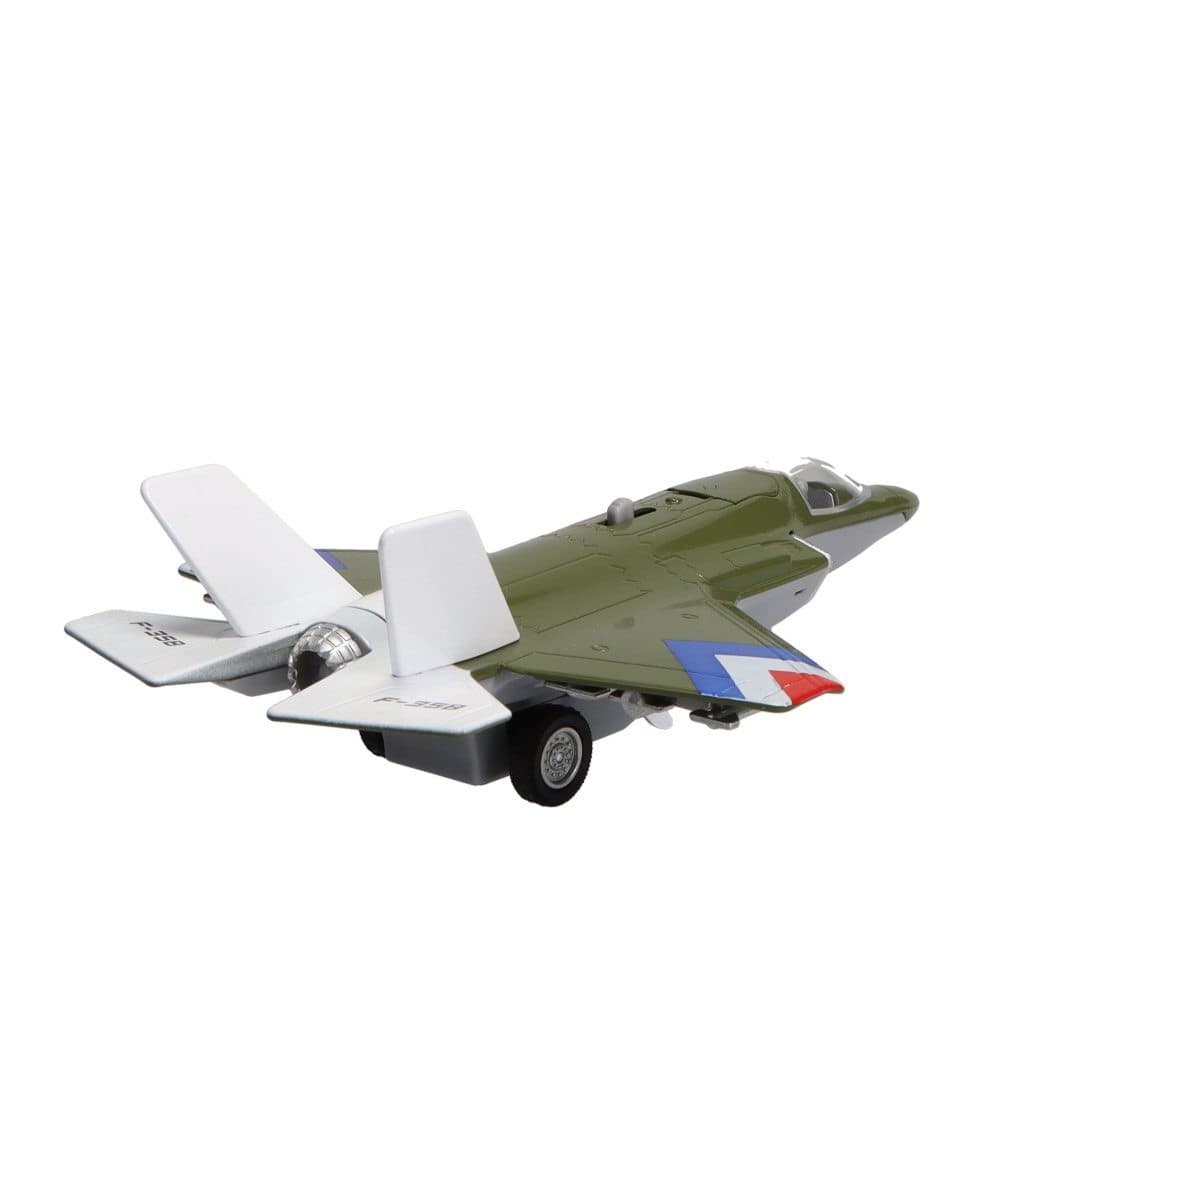 F-35 Jet Fighter Pullback w/Lights & Sound (1 Pc. Assorted Styles)